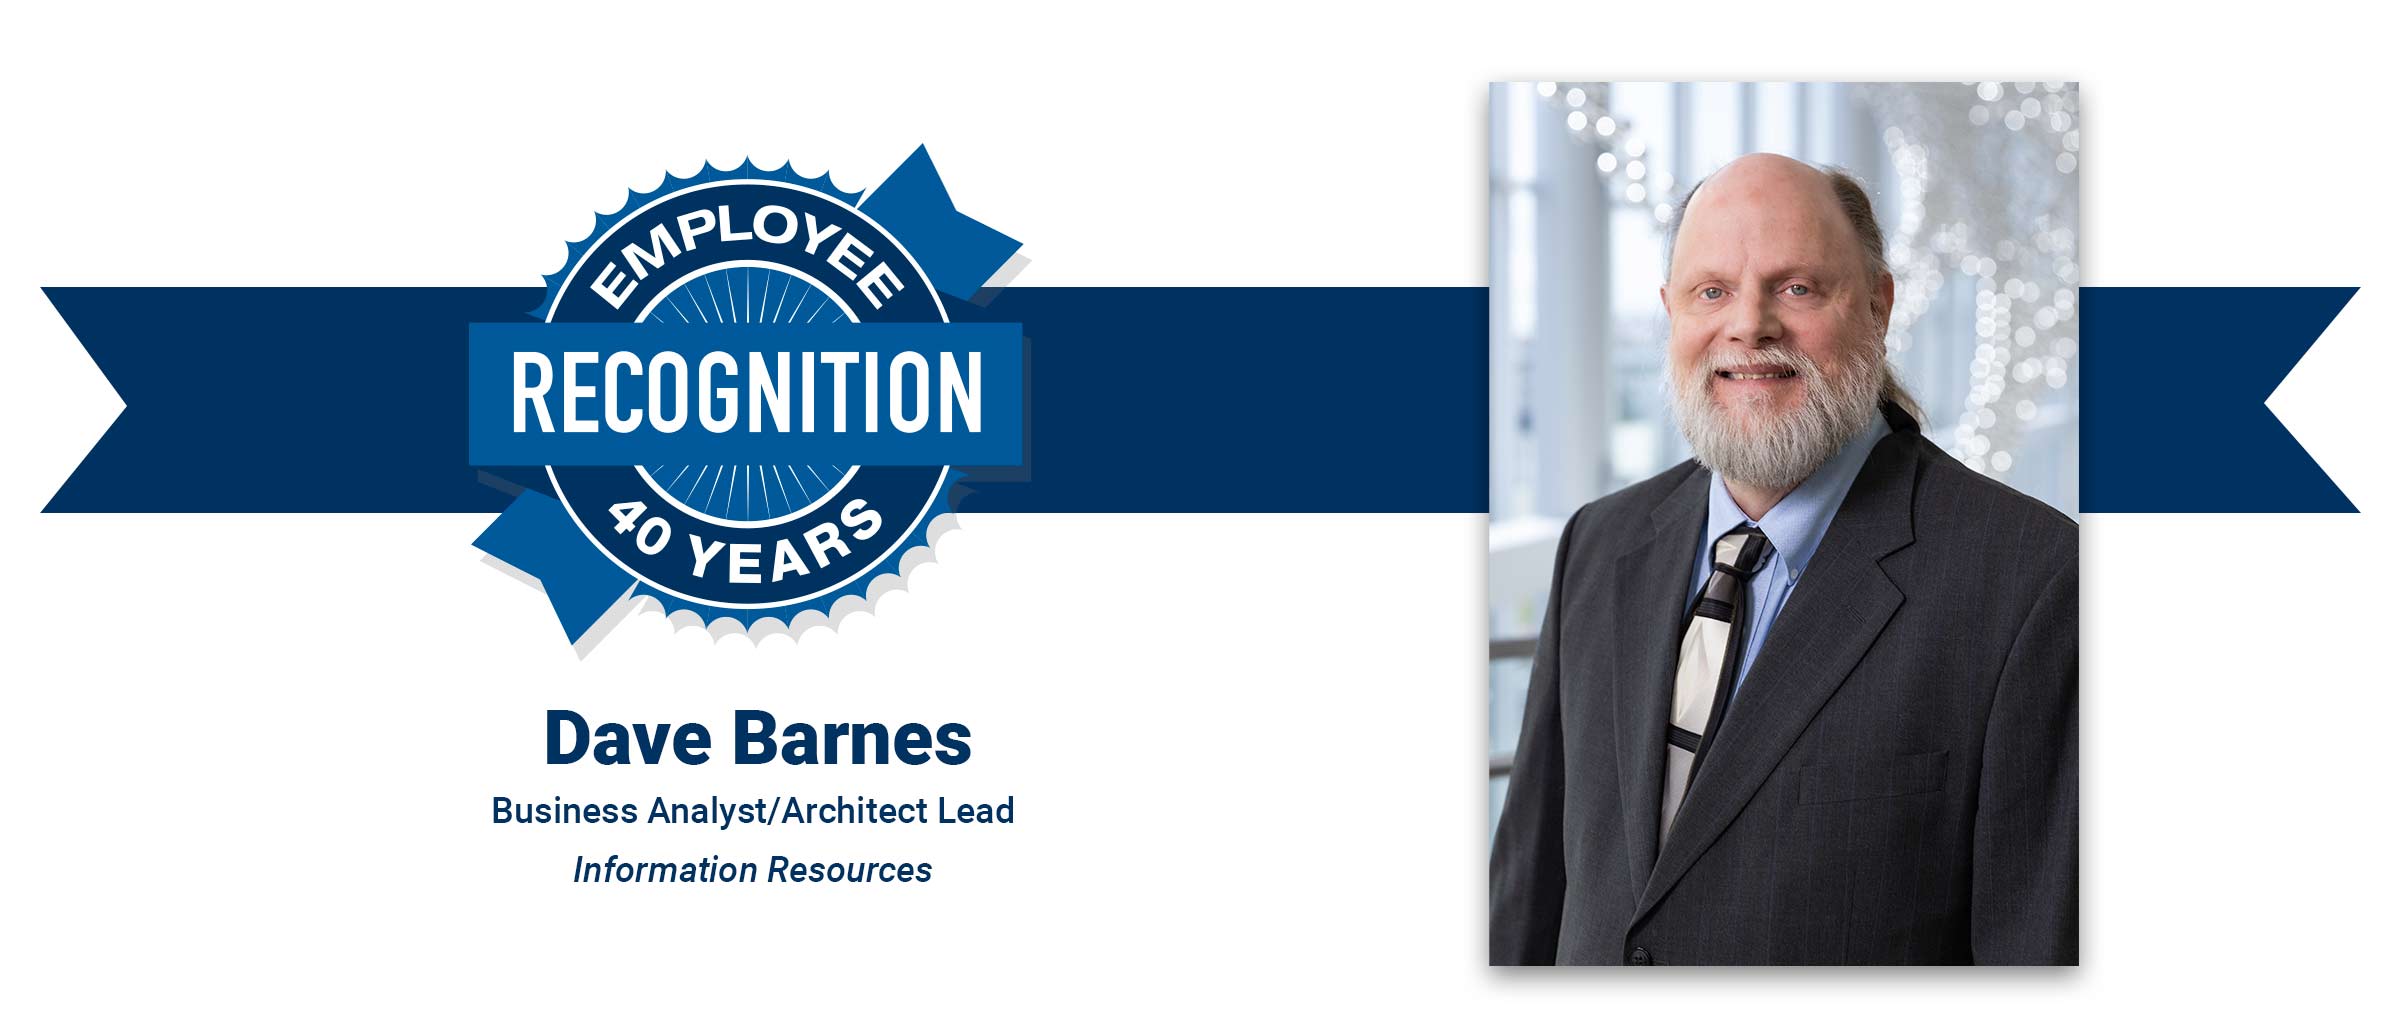 Man with gray beard, wearing a suit. David Barnes, 40 years employee recognition.